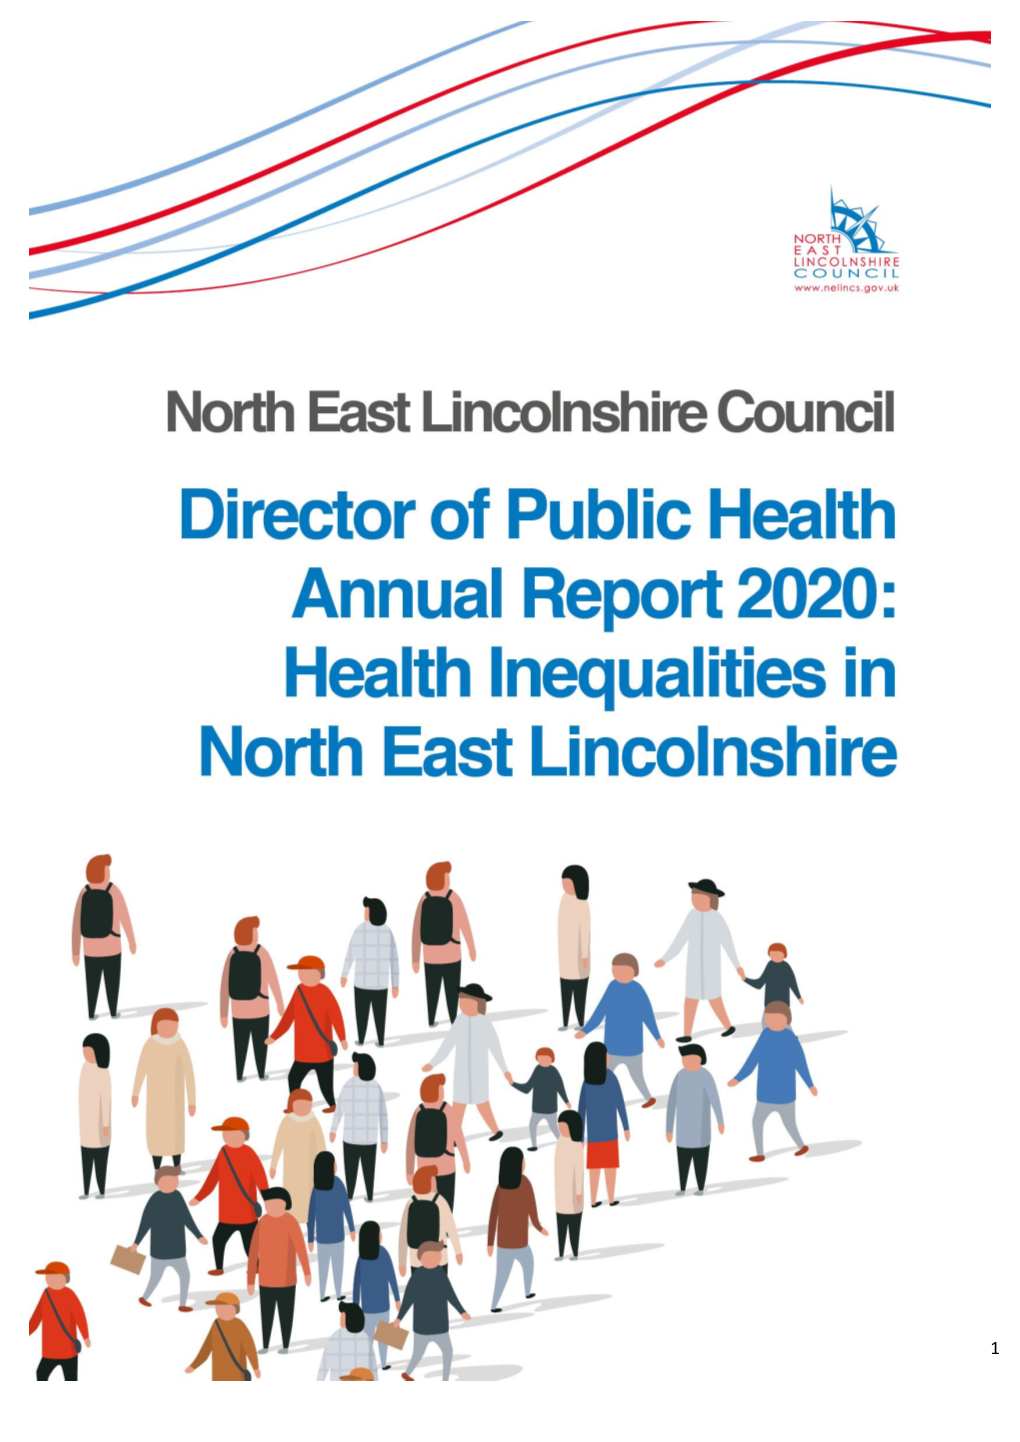 Director of Public Health Annual Report 2020: Health Inequalities in North East Lincolnshire